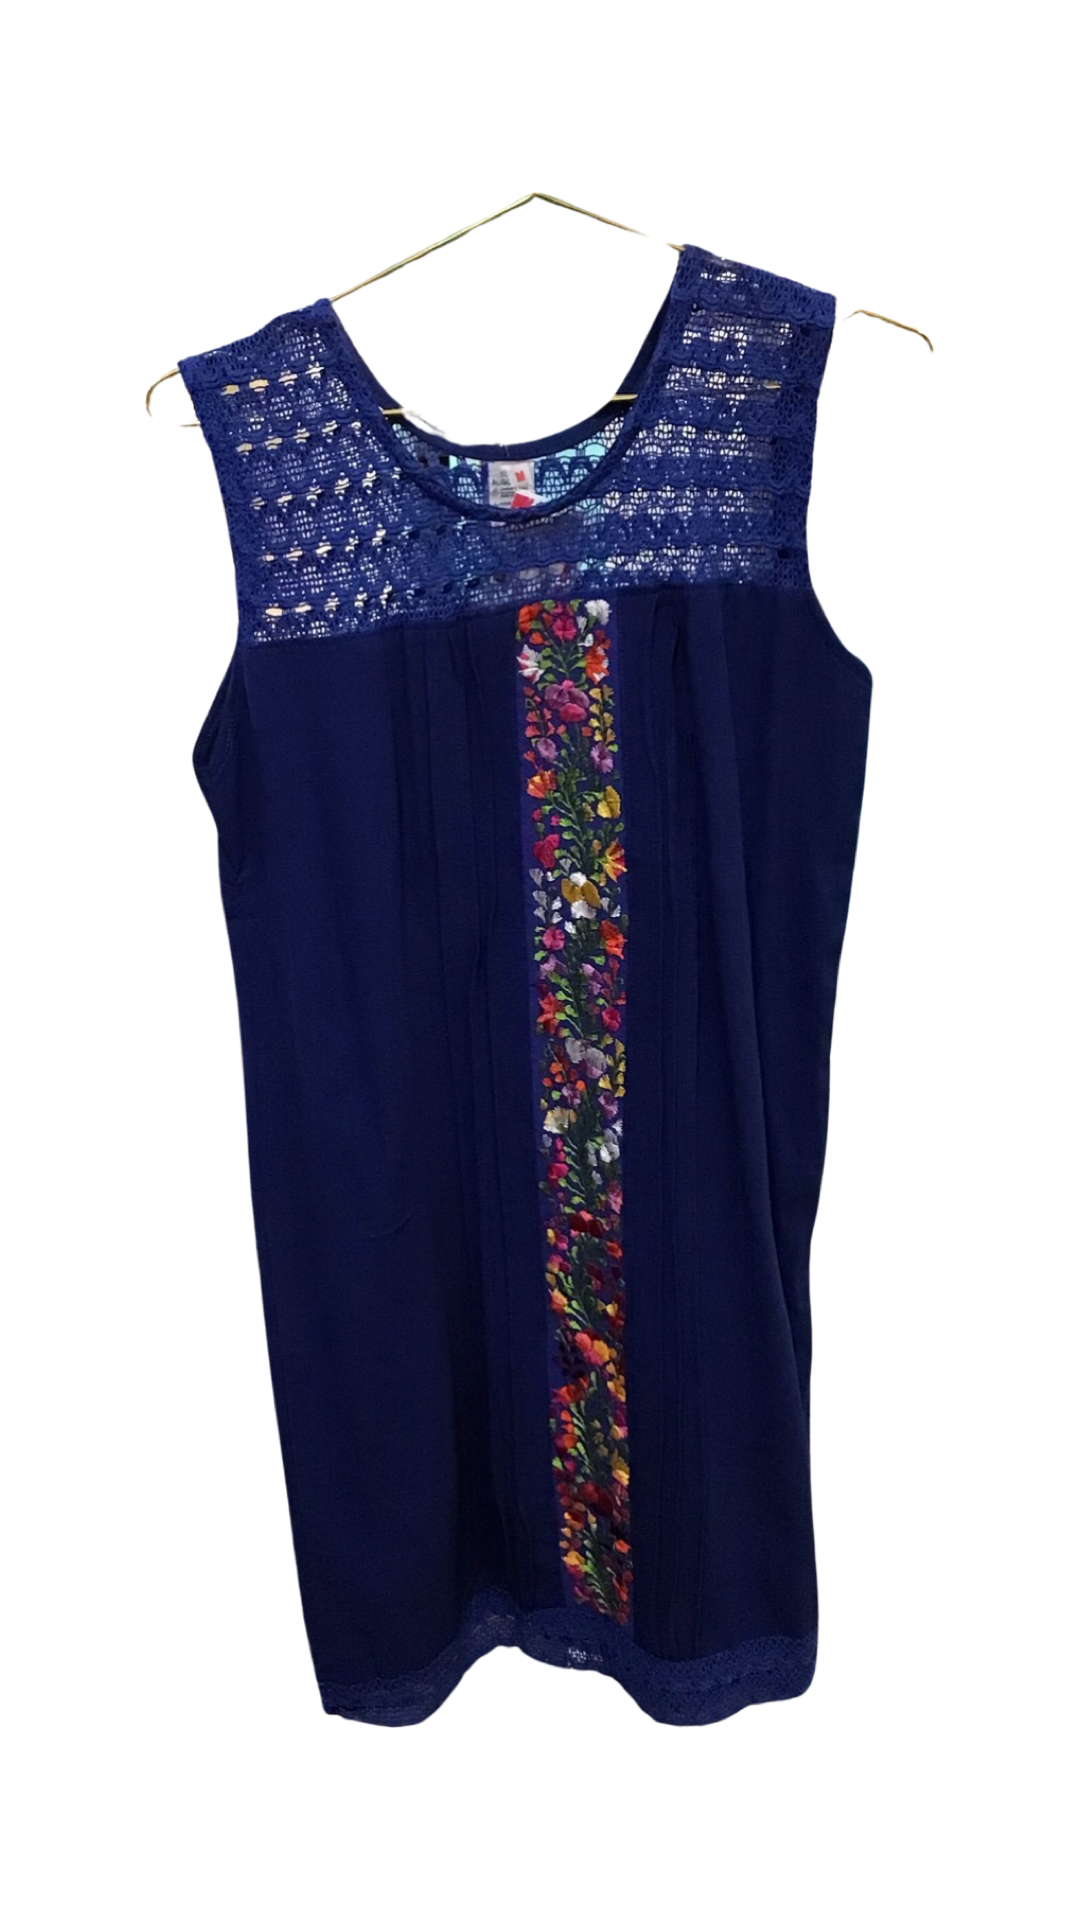 Woman’s Sleeveless Embroidered Dress